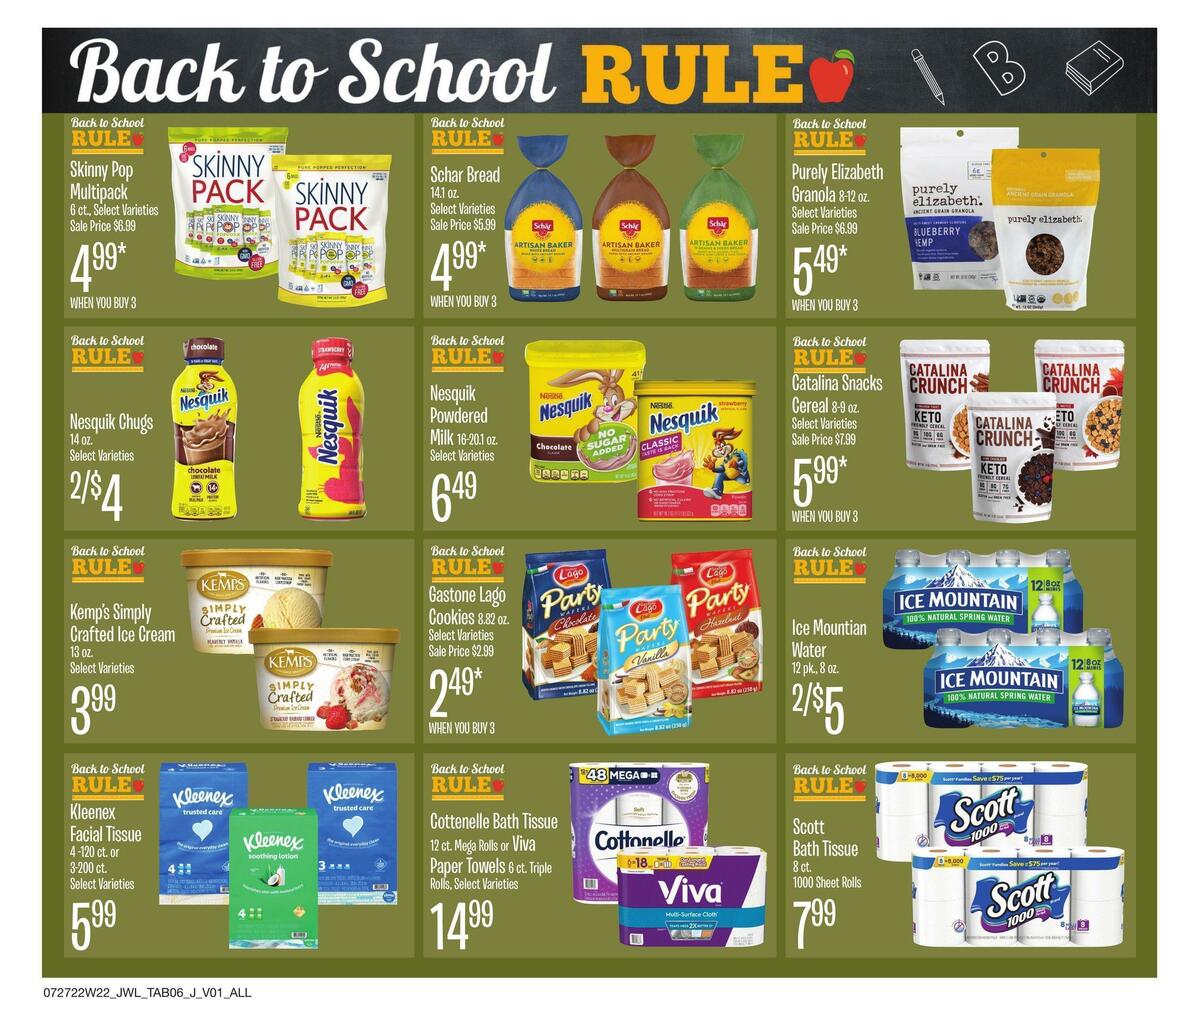 Jewel Osco Natural & Organic Weekly Ad from July 27